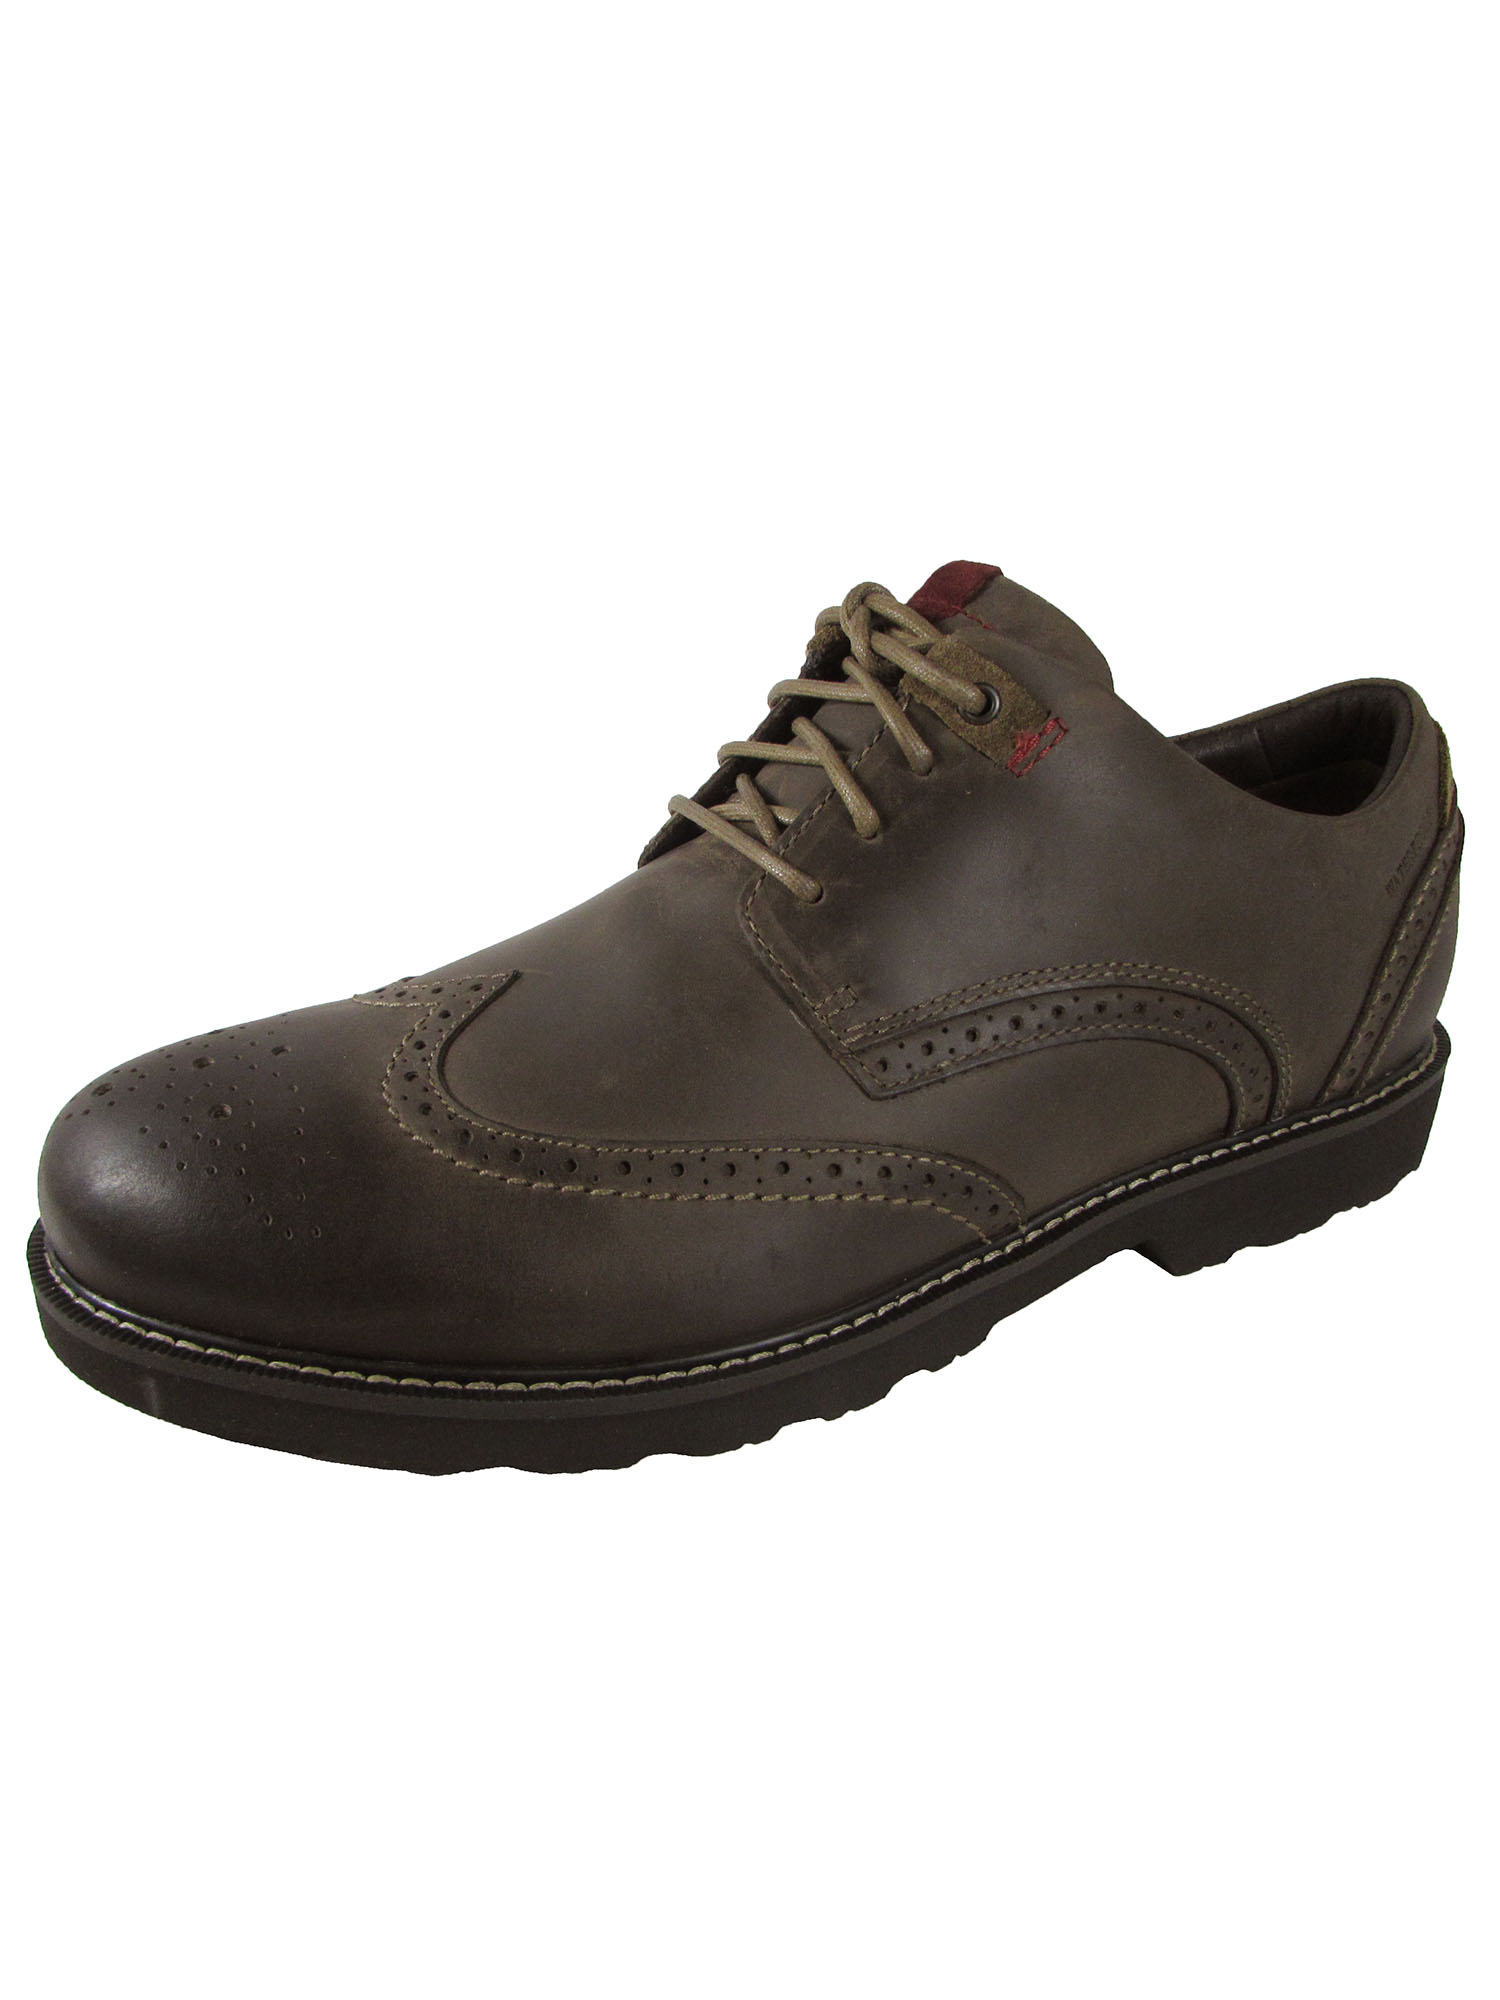 Dunham Mens REVDare Wingtip Oxford Shoes, Stone, US 8 - image 1 of 4